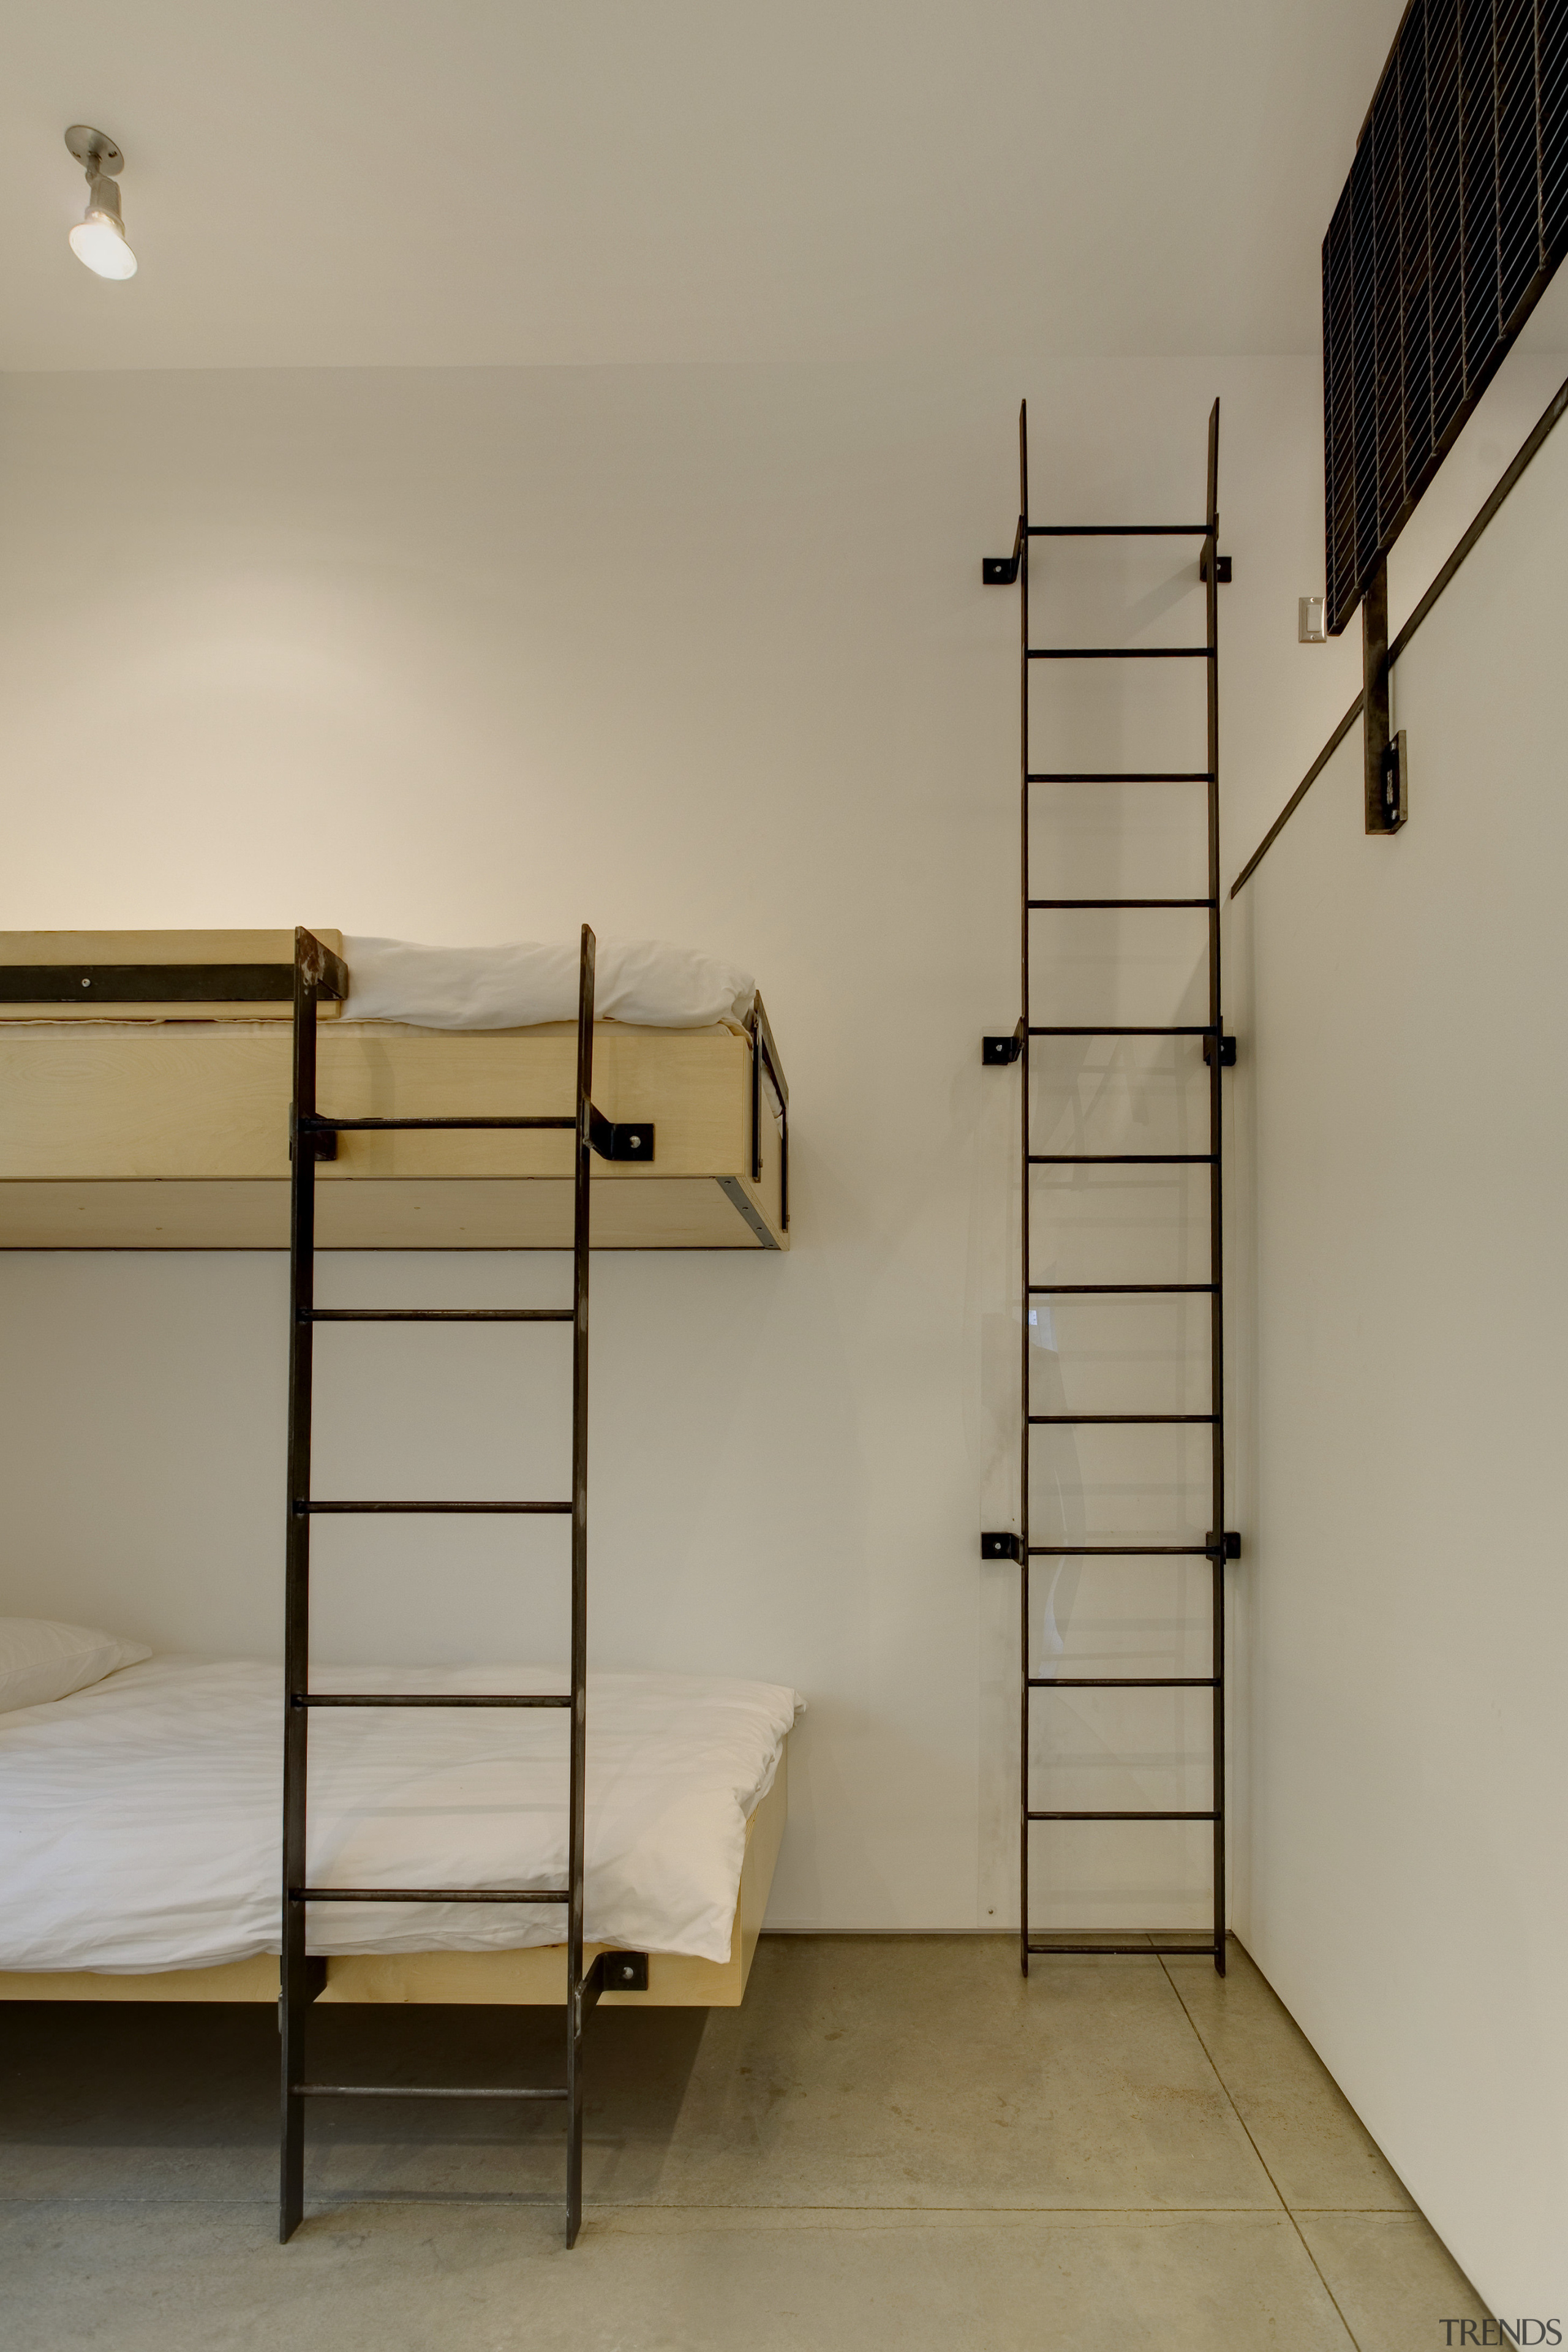 View of bunk beds with ladders. - View floor, furniture, product design, shelf, shelving, wood, orange